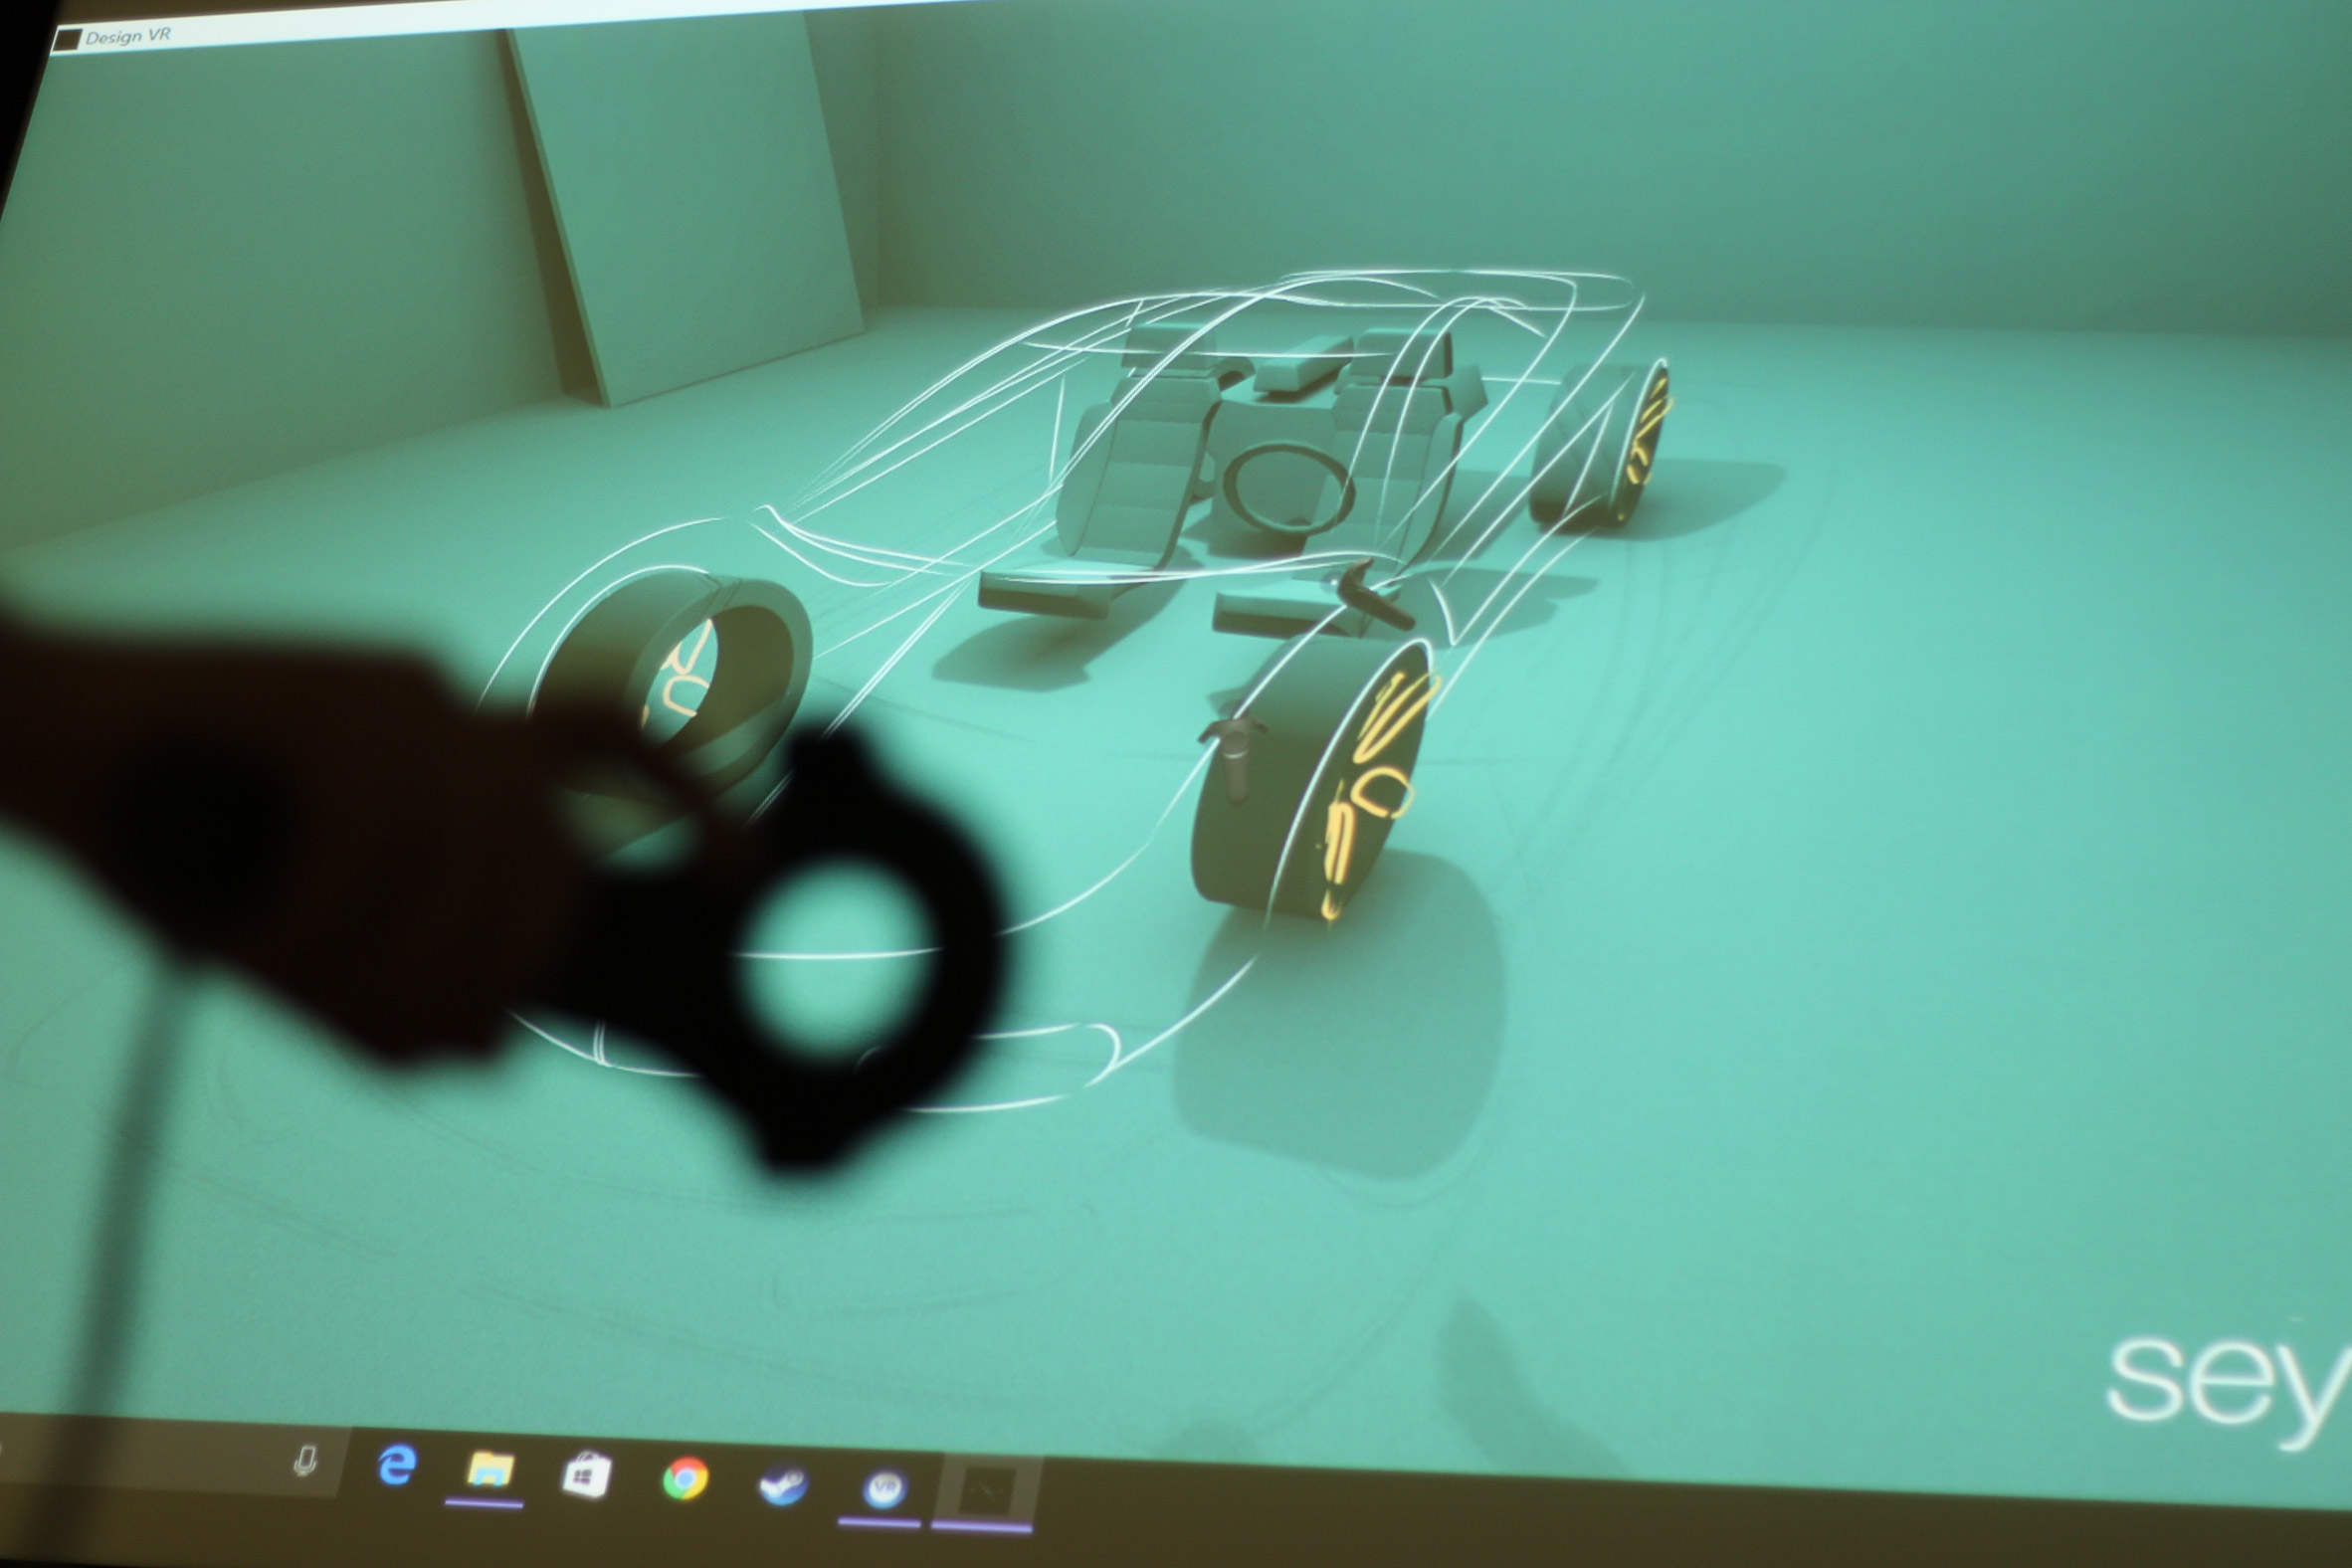 Seymourpowell demos VR software for collaboratively designing cars-4